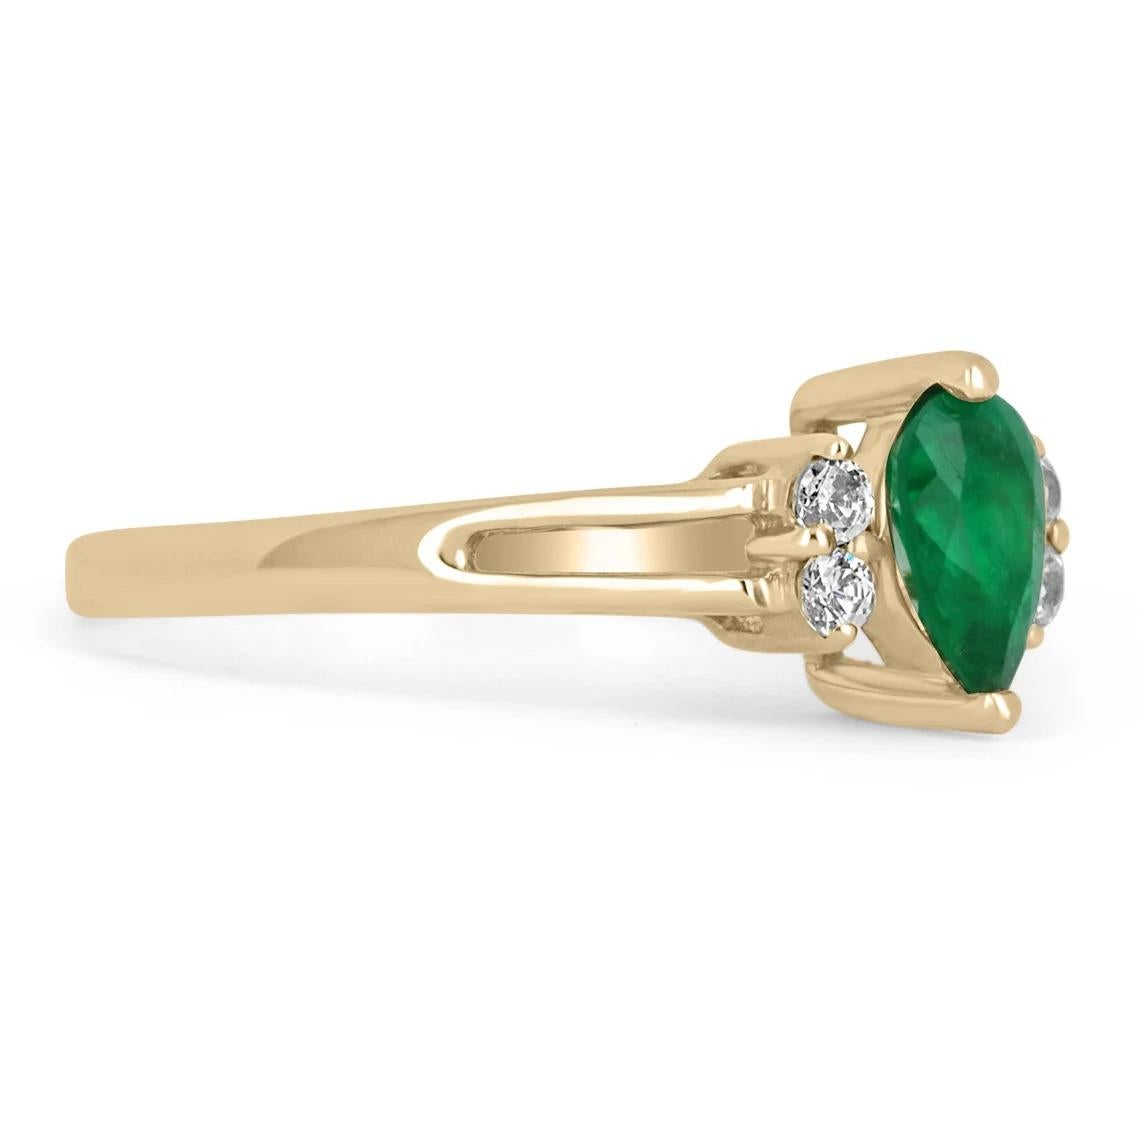 A simple, and petite emerald and diamond ring. The center stone is a 0.20-carat AAA+ Colombian emerald, pear-shaped. The center stone displays a stunning, vivacious dark green color and excellent luster. Two bright, brilliant round diamonds accent